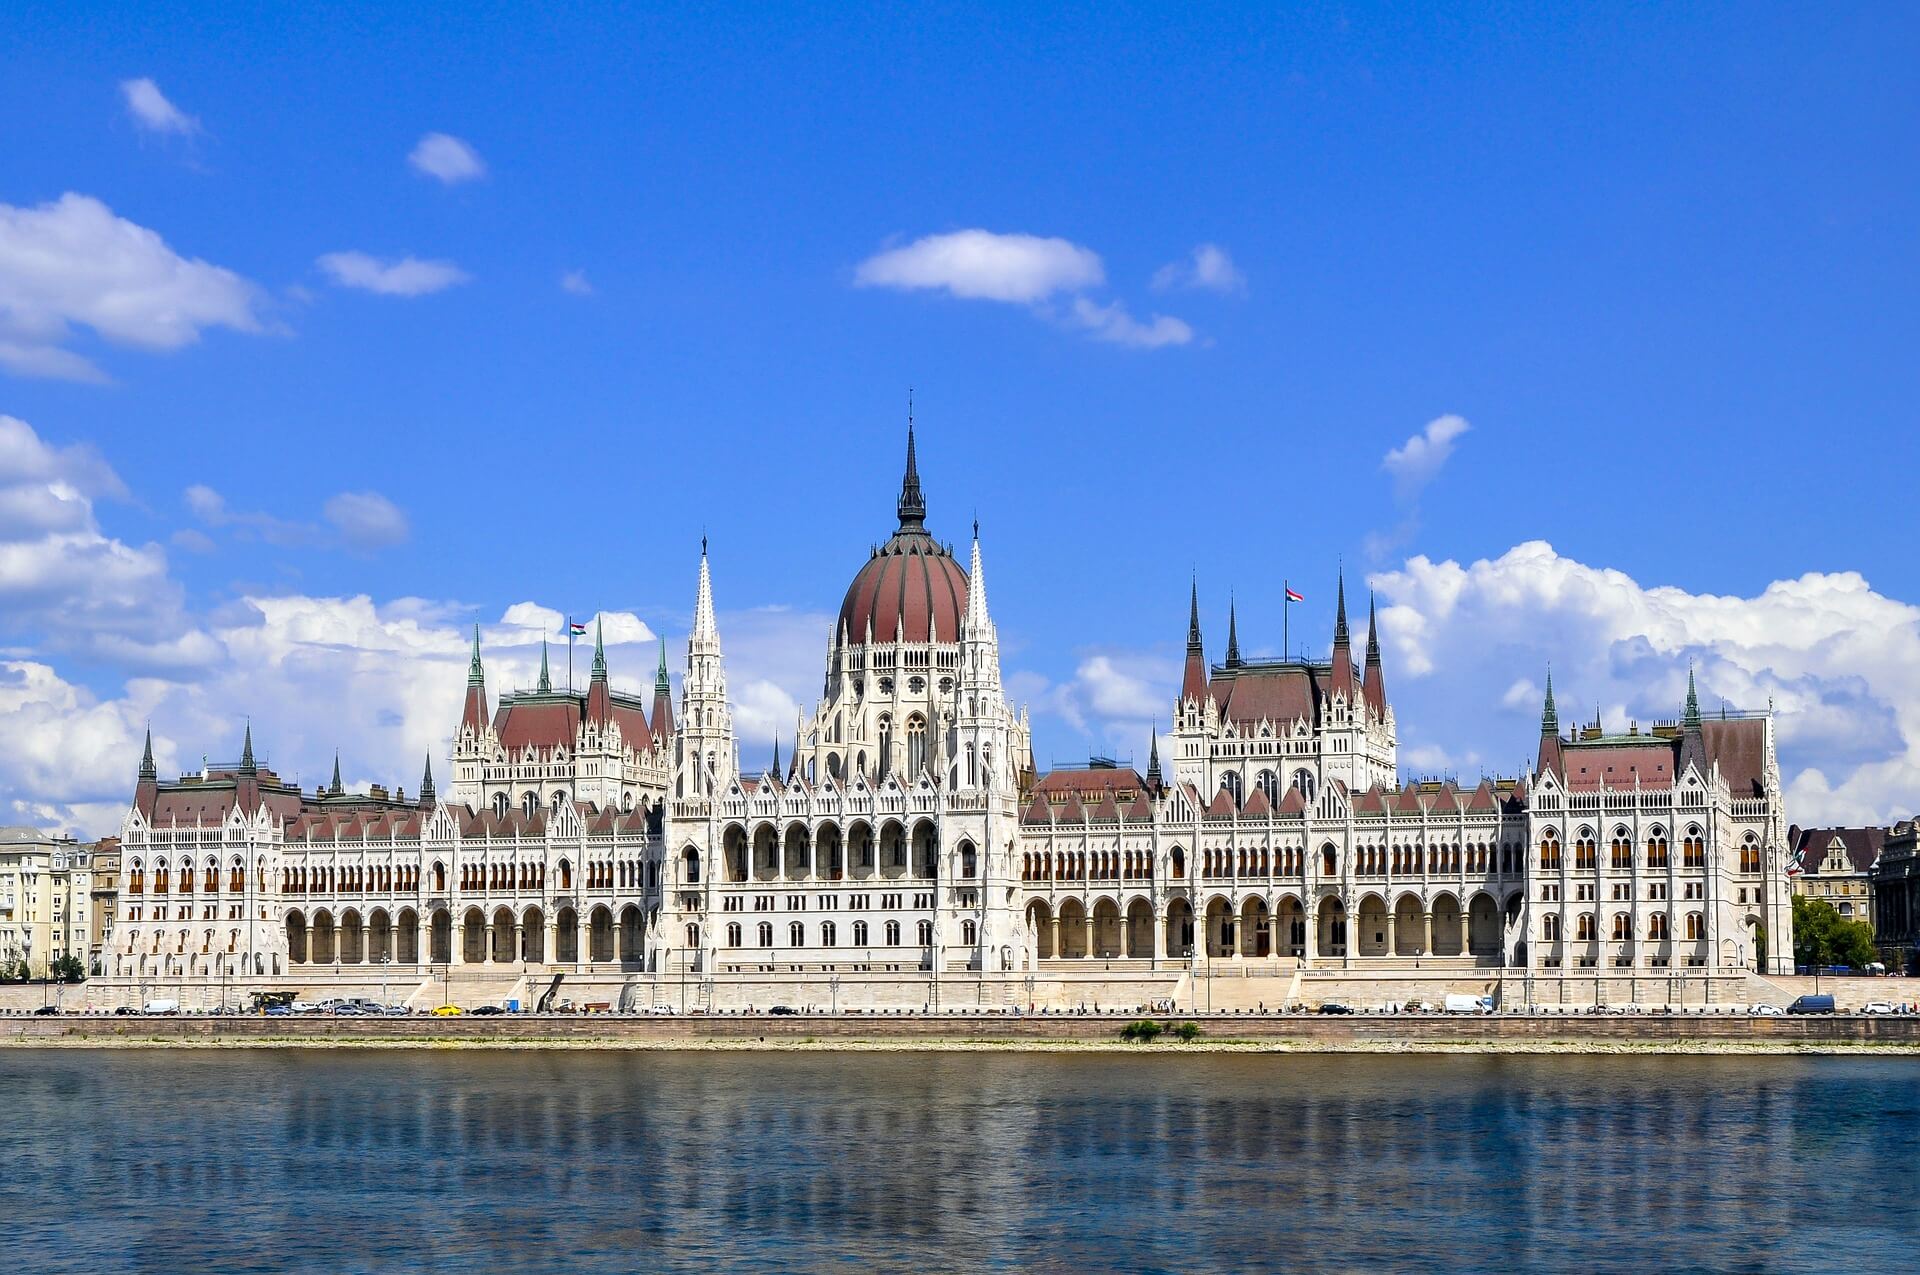 the building of the majestic parliament of Hungary which is located in the capital Budapest